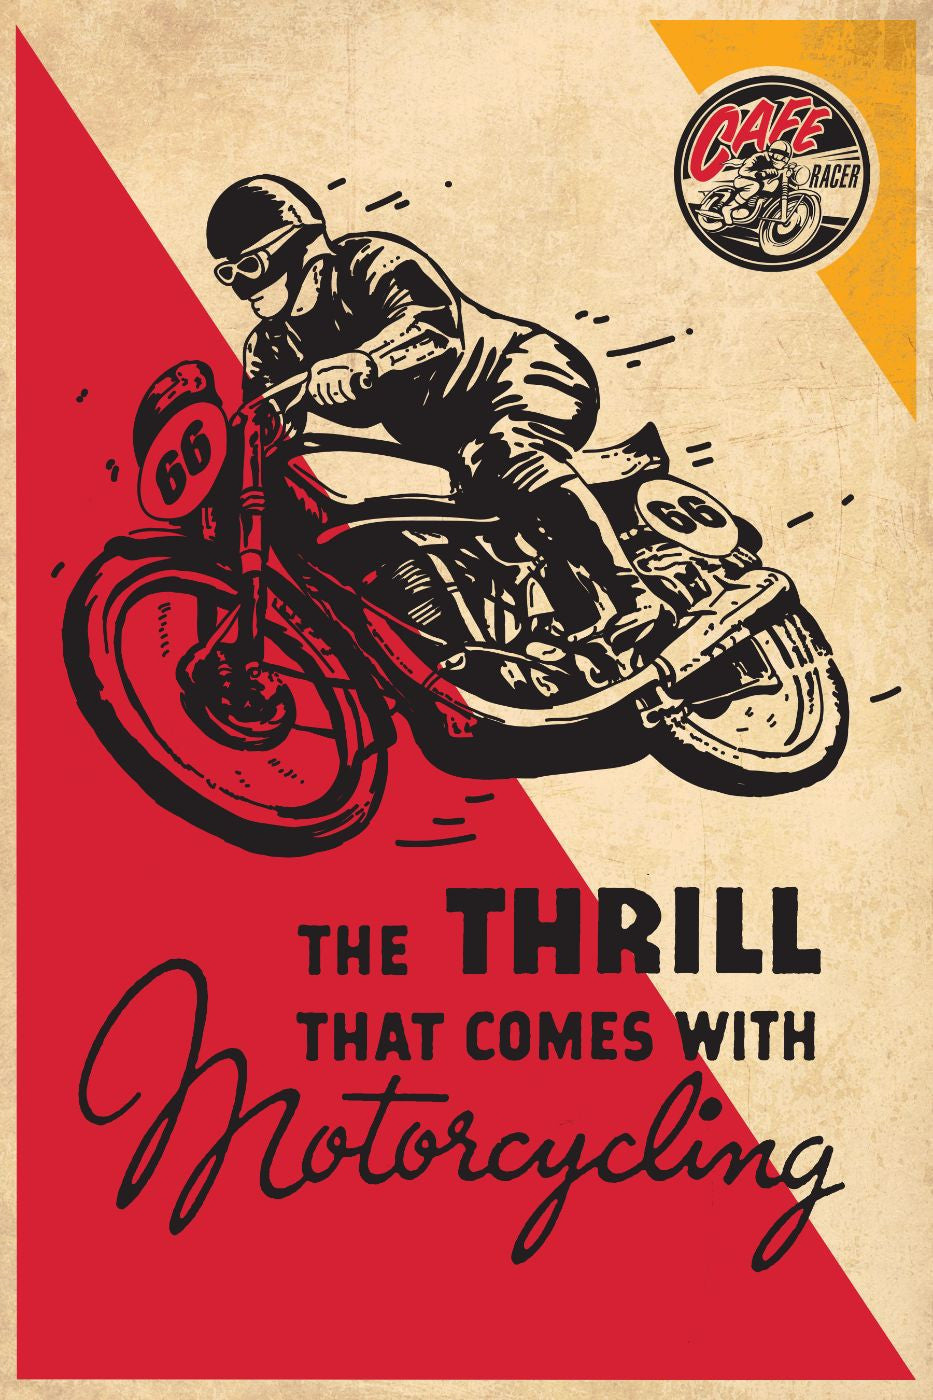 Vintage Poster - Thrill Of Motorcycling - Framed Prints by David | Buy Posters, Frames, & Digital Art | Small, Medium and Large Variants